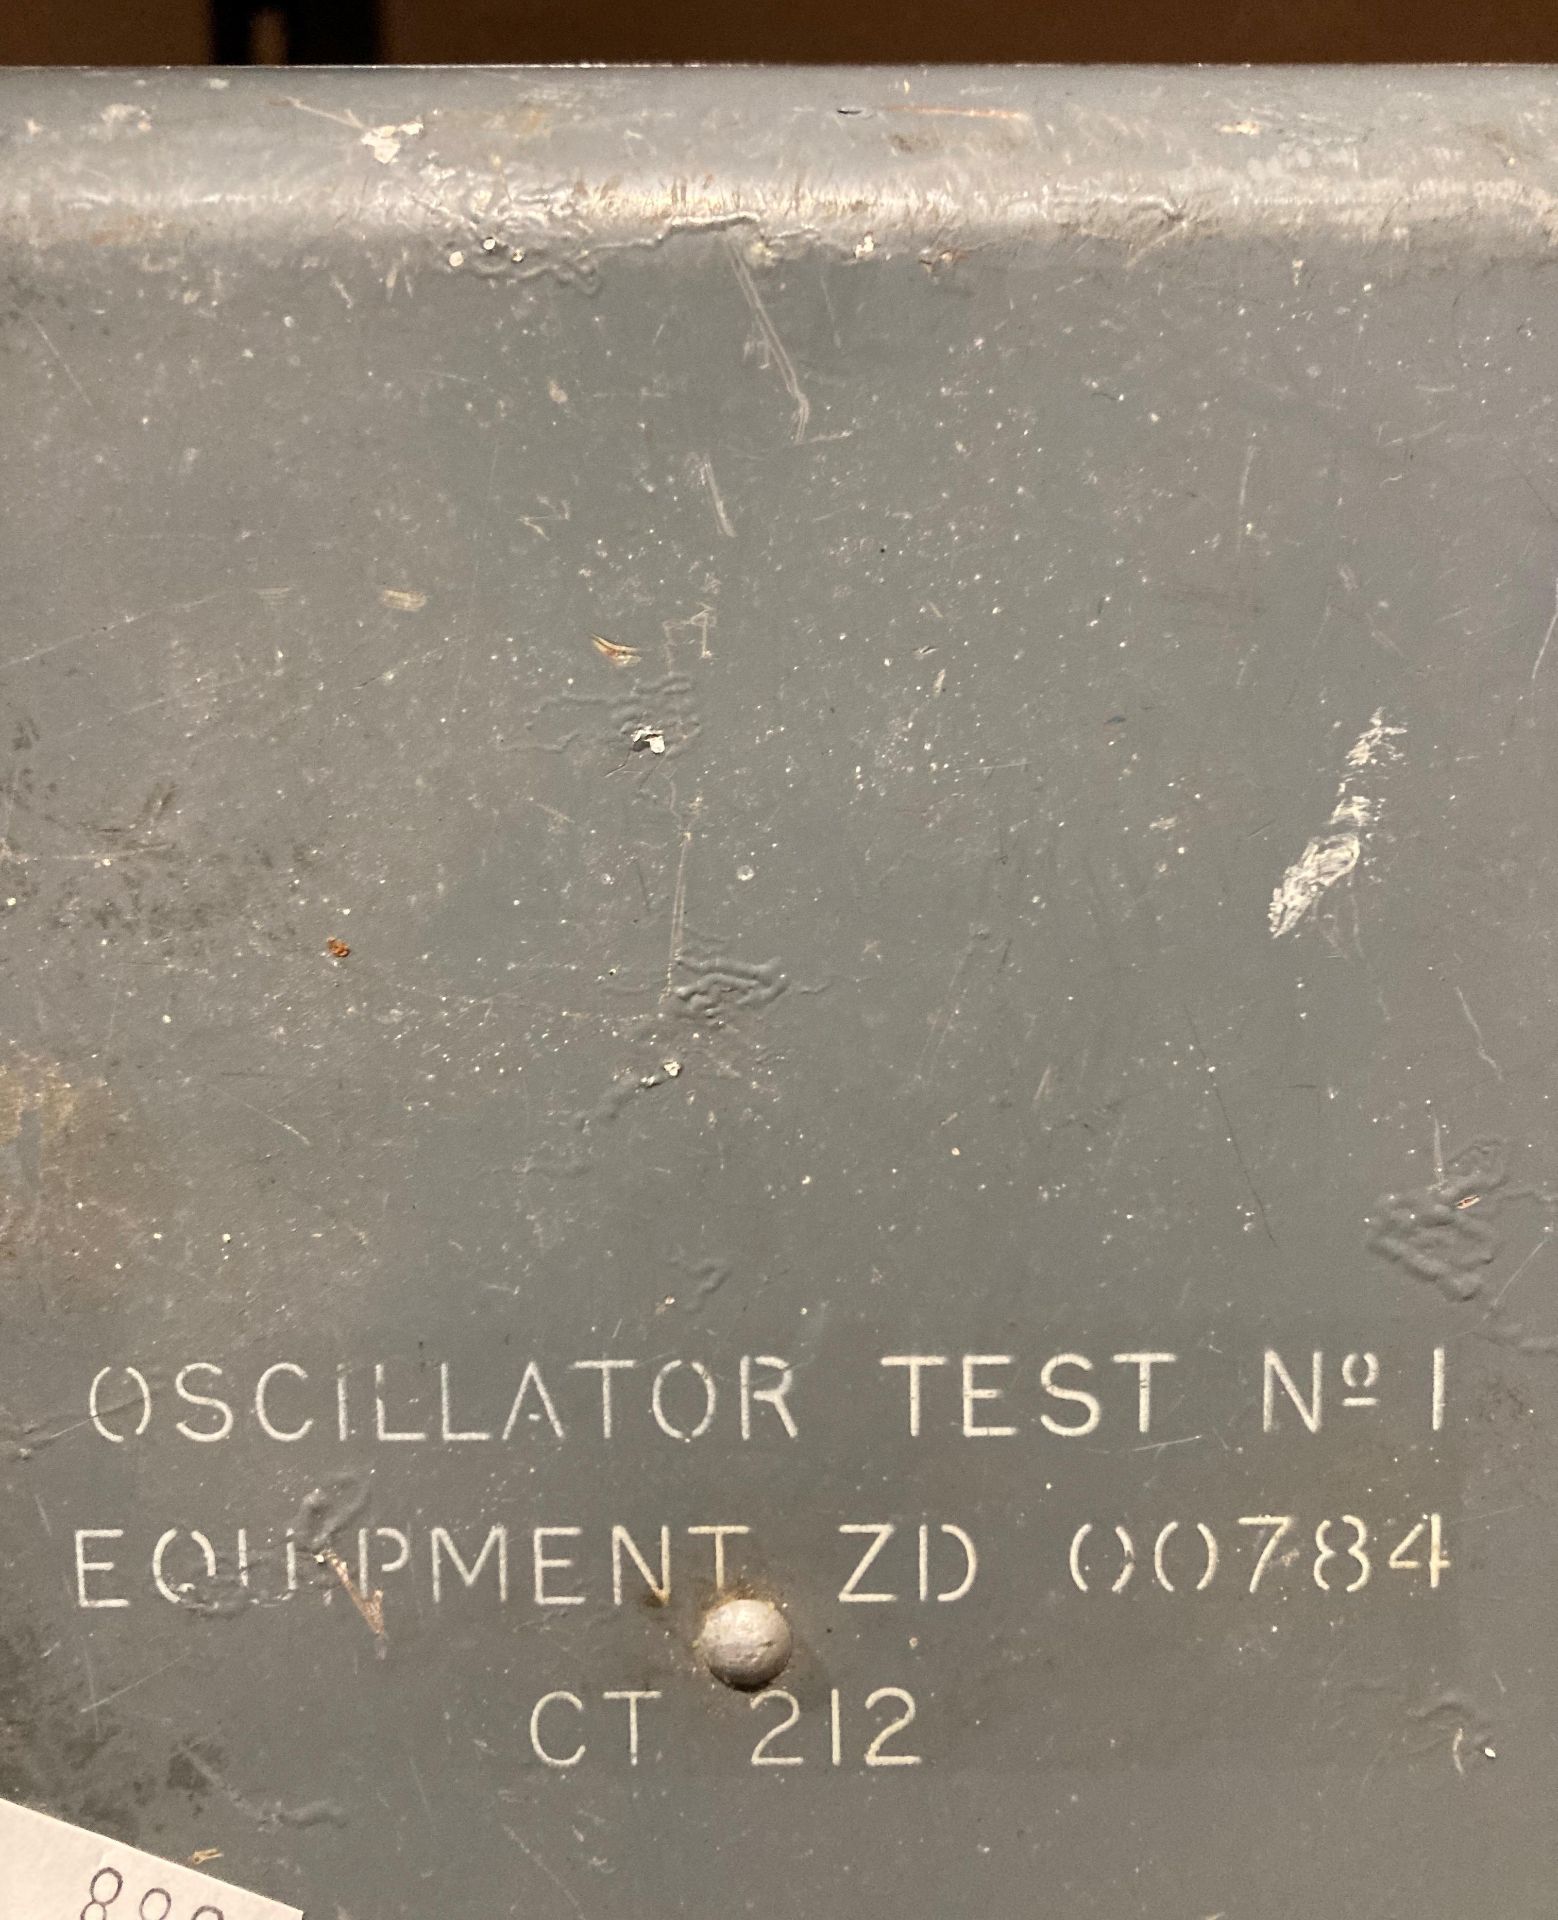 Oscillator Test No 1 Equipment ZD 00784 CT 212 serial no: 869 in grey metal case and a brown bag of - Image 2 of 3